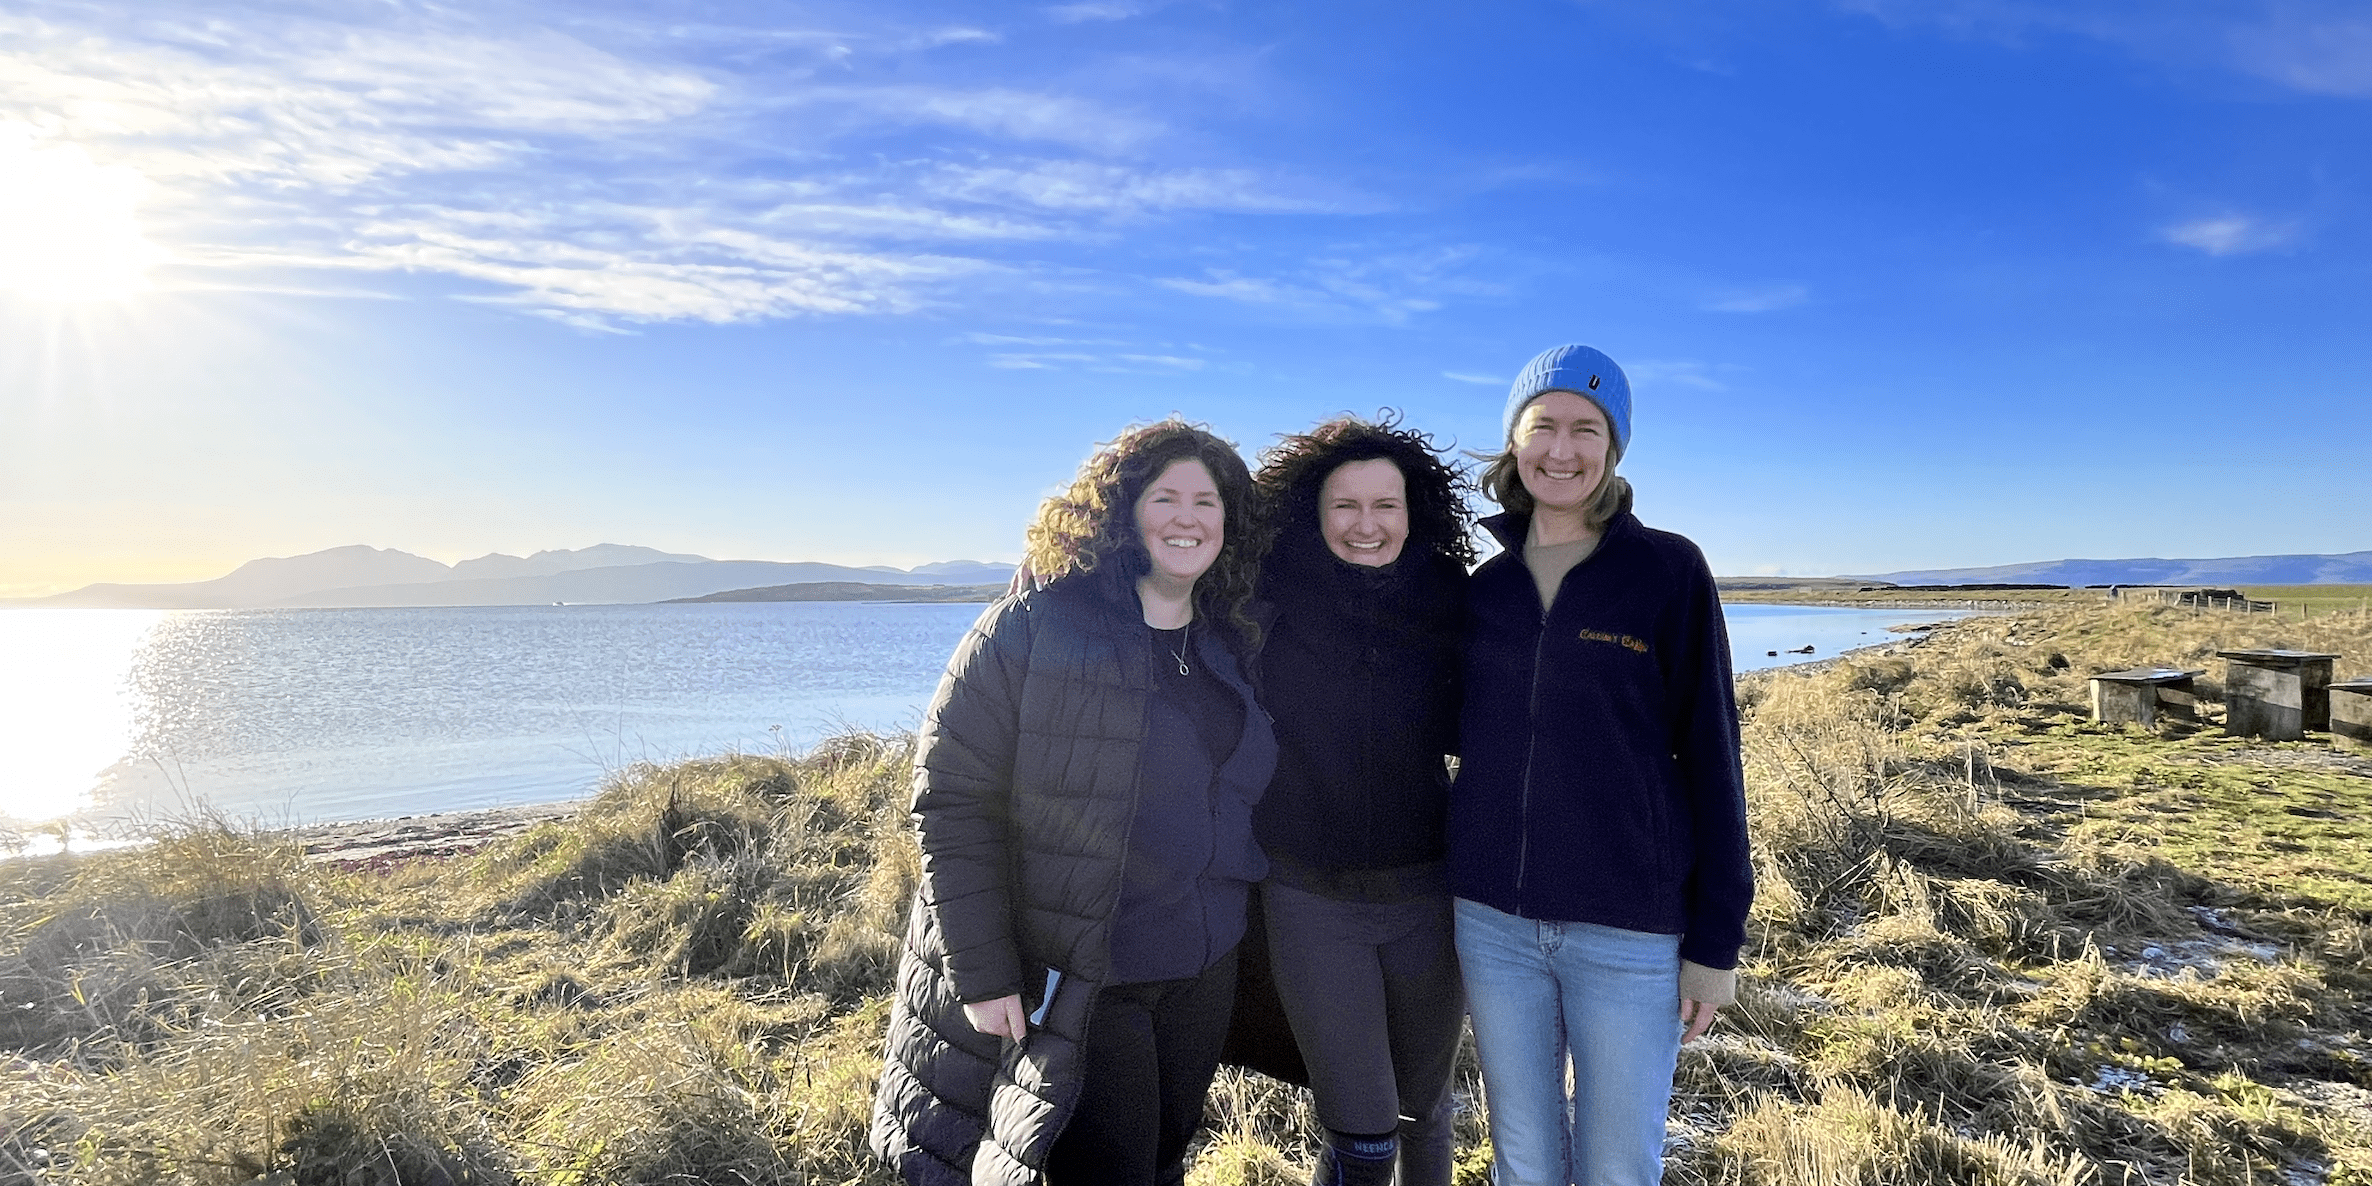 Three women stand together smiling, on a crisp wintery day.